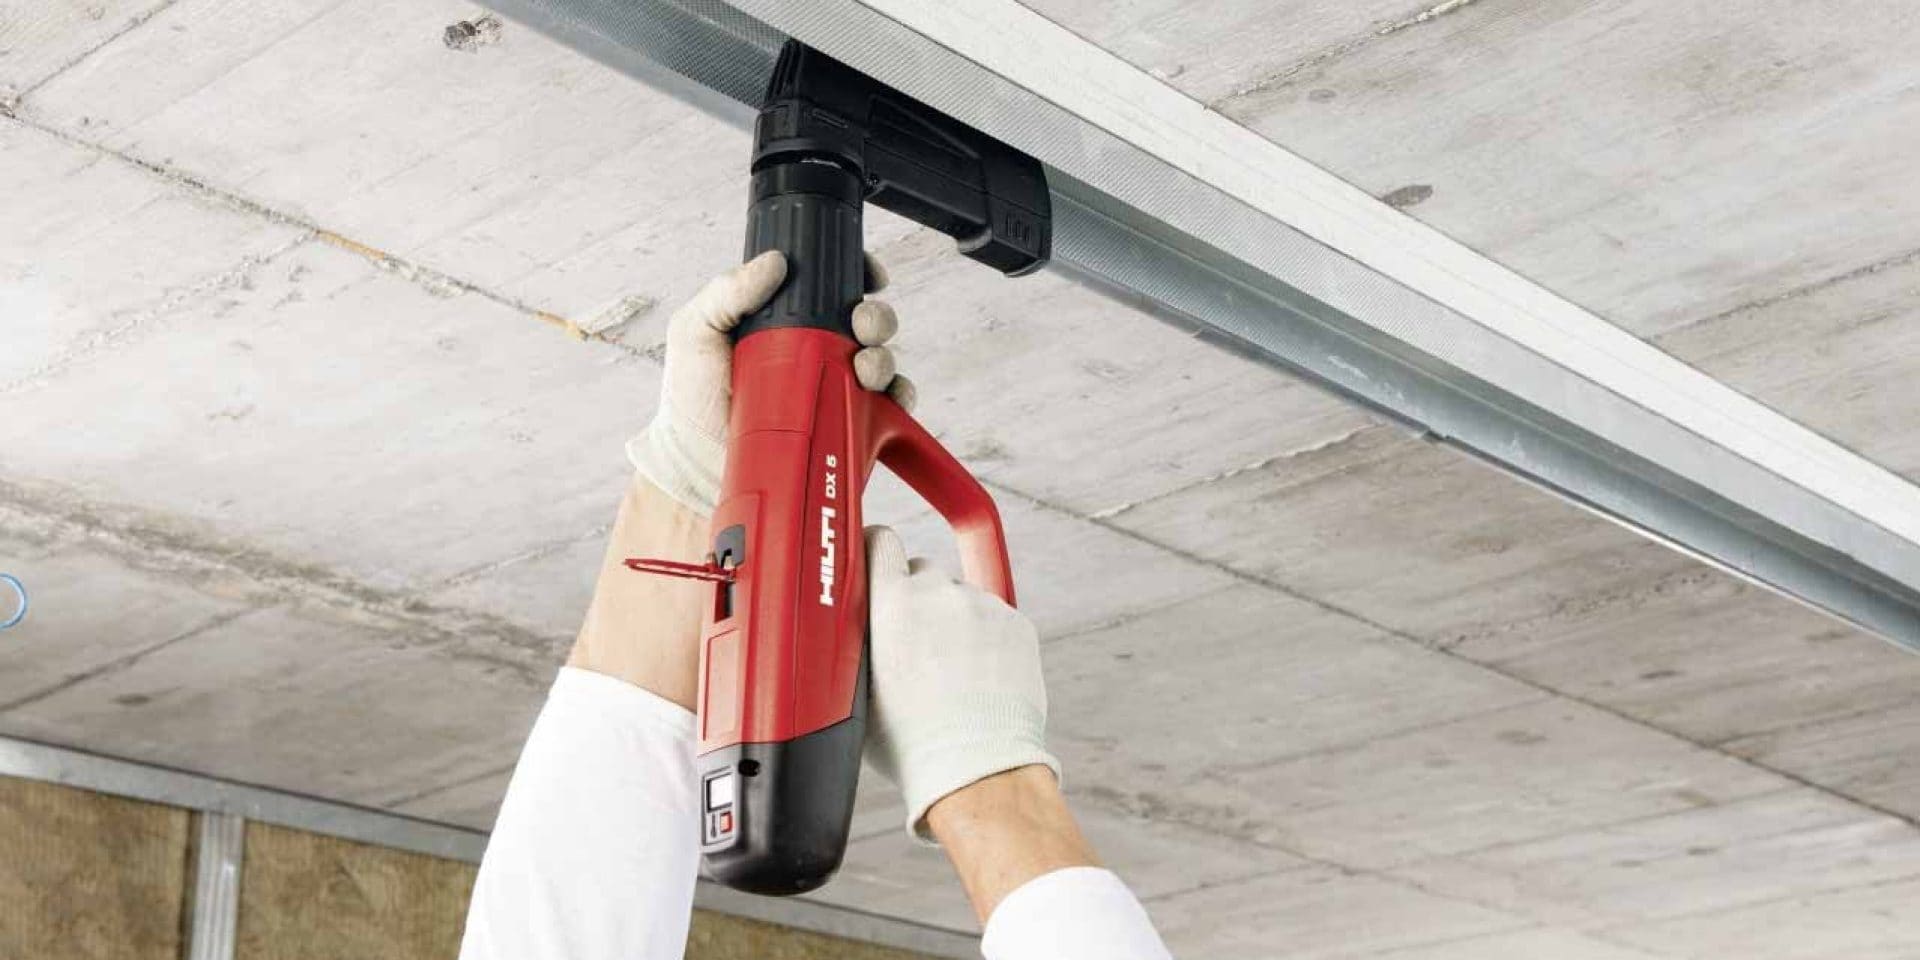 DX 5 power-actuate tool for overhead fastening